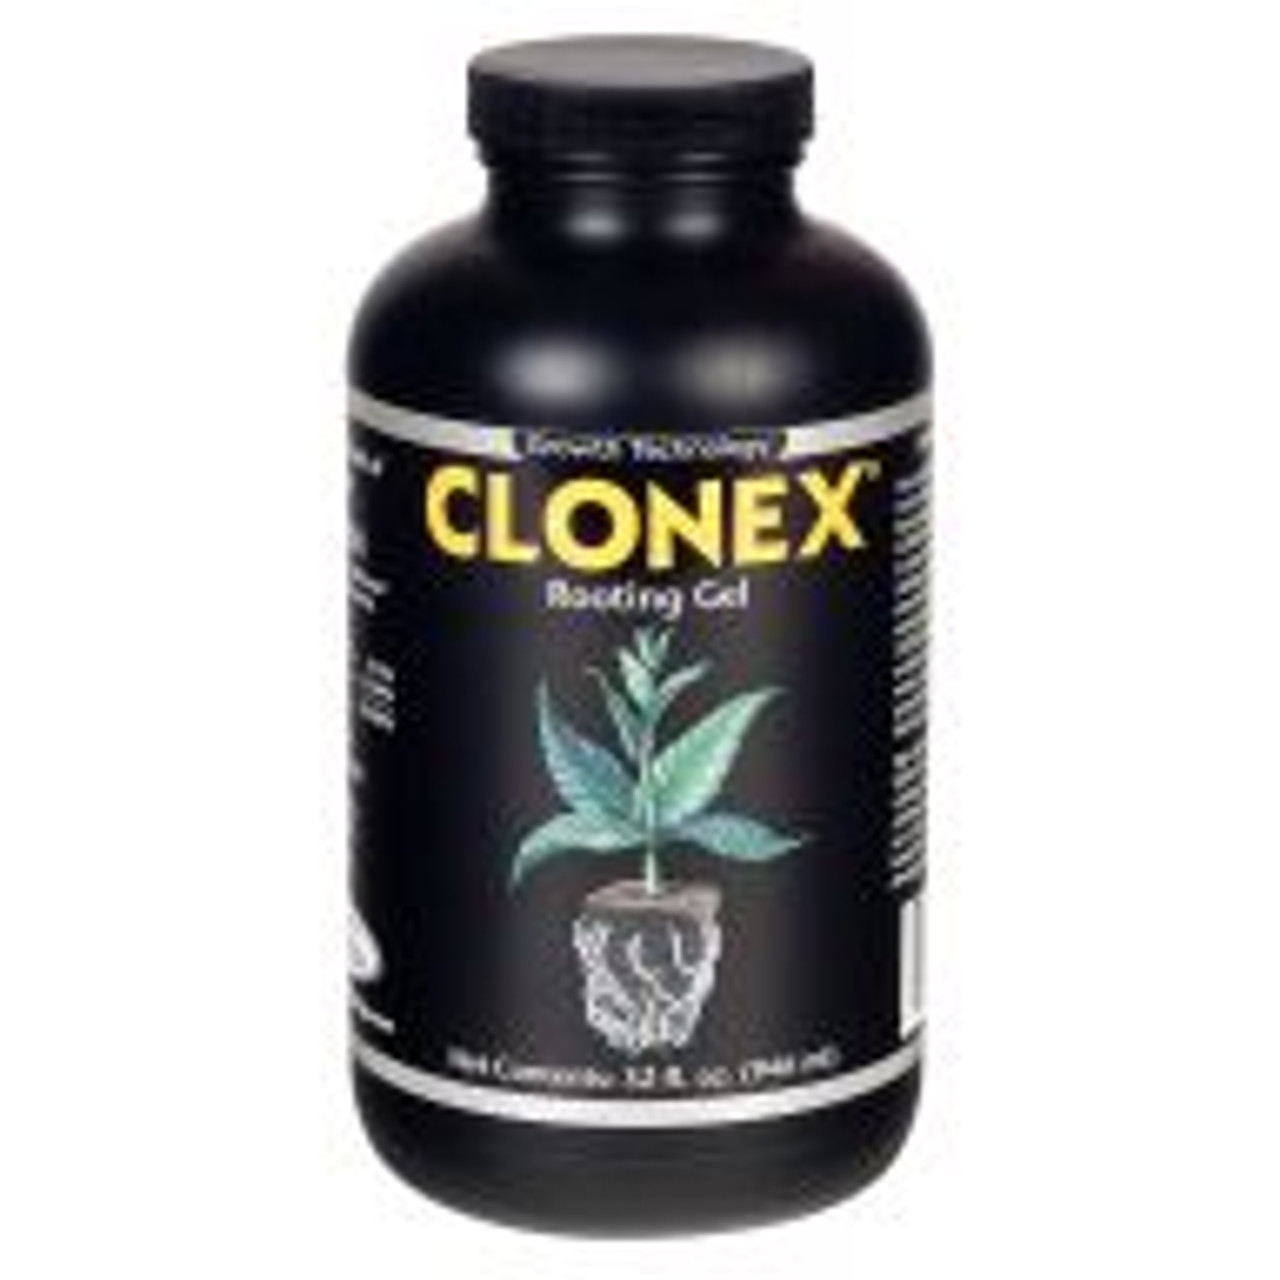 Clonex® Rooting Gel is a high-performance, water-based, rooting compound developed by Growth Technology Ltd.  It is a tenacious gel which will remain in contact around the stem, sealing the cut tissue and supplying the hormones needed to promote root cell development and vitamins to protect the delicate new root tissue.  Clonex® is EPA-registered and approved for use on all plants, including food crops.